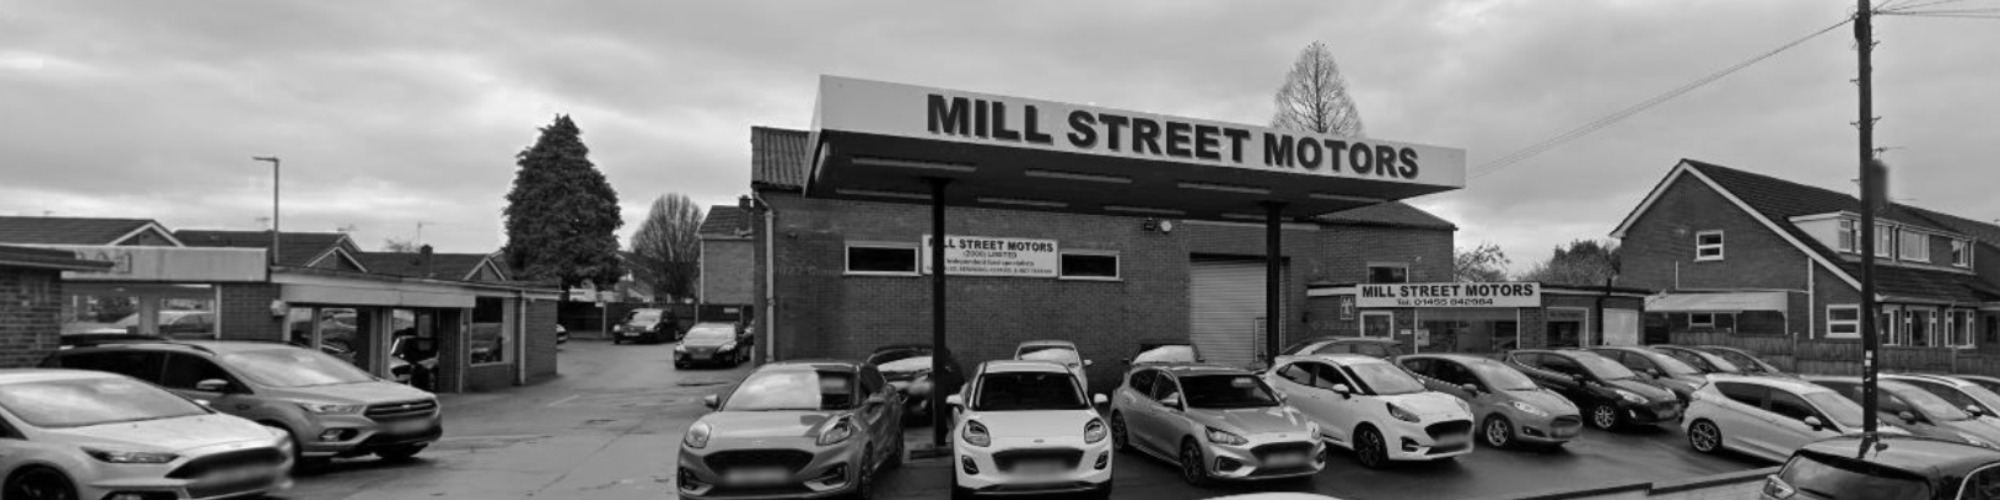 About Us at Mill Street Motors, Leicester